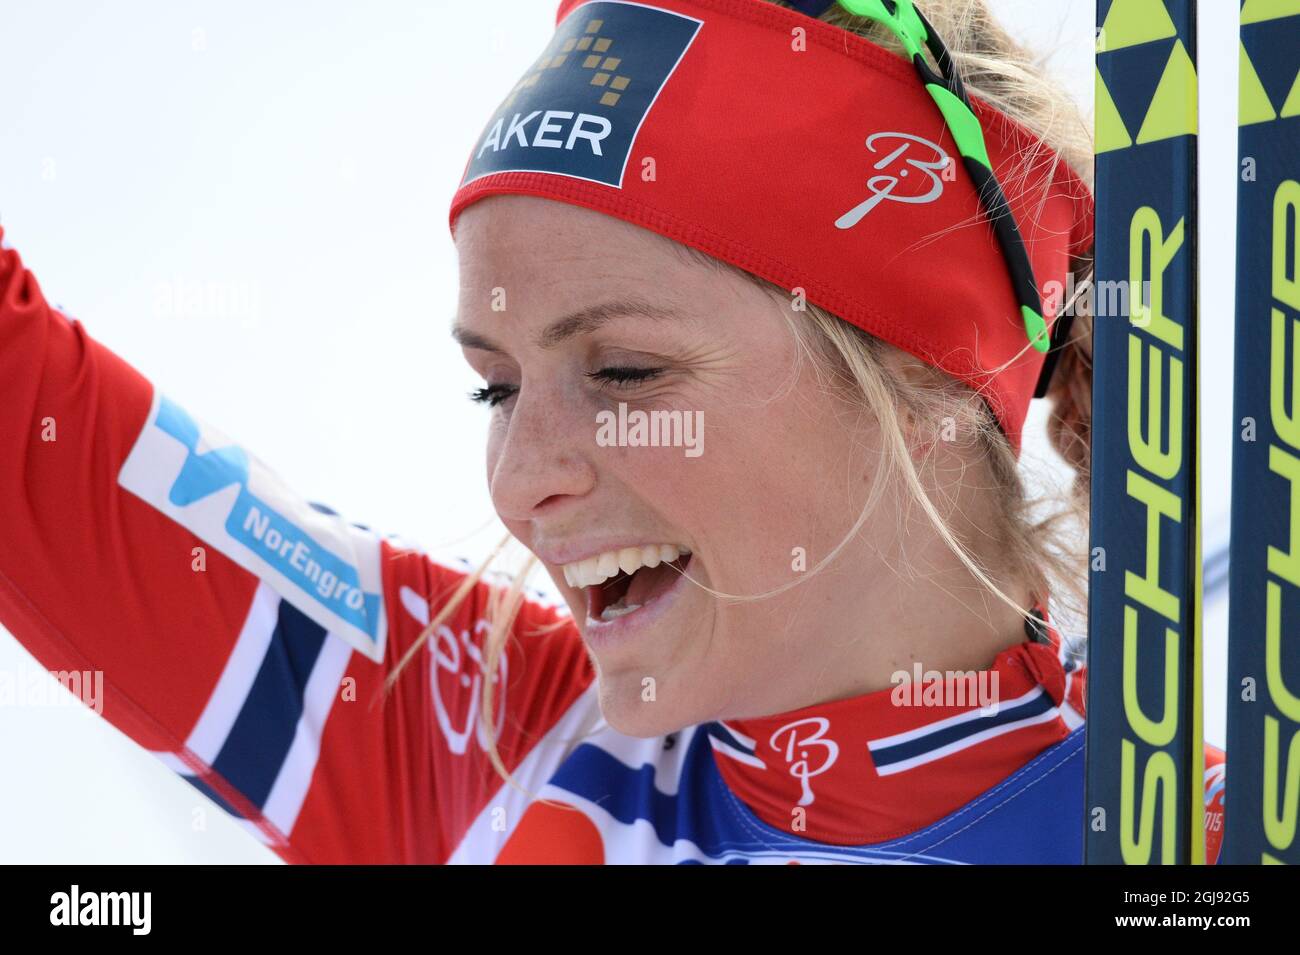 Norway's Therese Johaug celebrates winning after crossing the finish line  of the women's 30kms mass start event at the FIS Nordic Skiing World  Championships in Falun, Sweden, on Feb. 28, 2015. Photo: